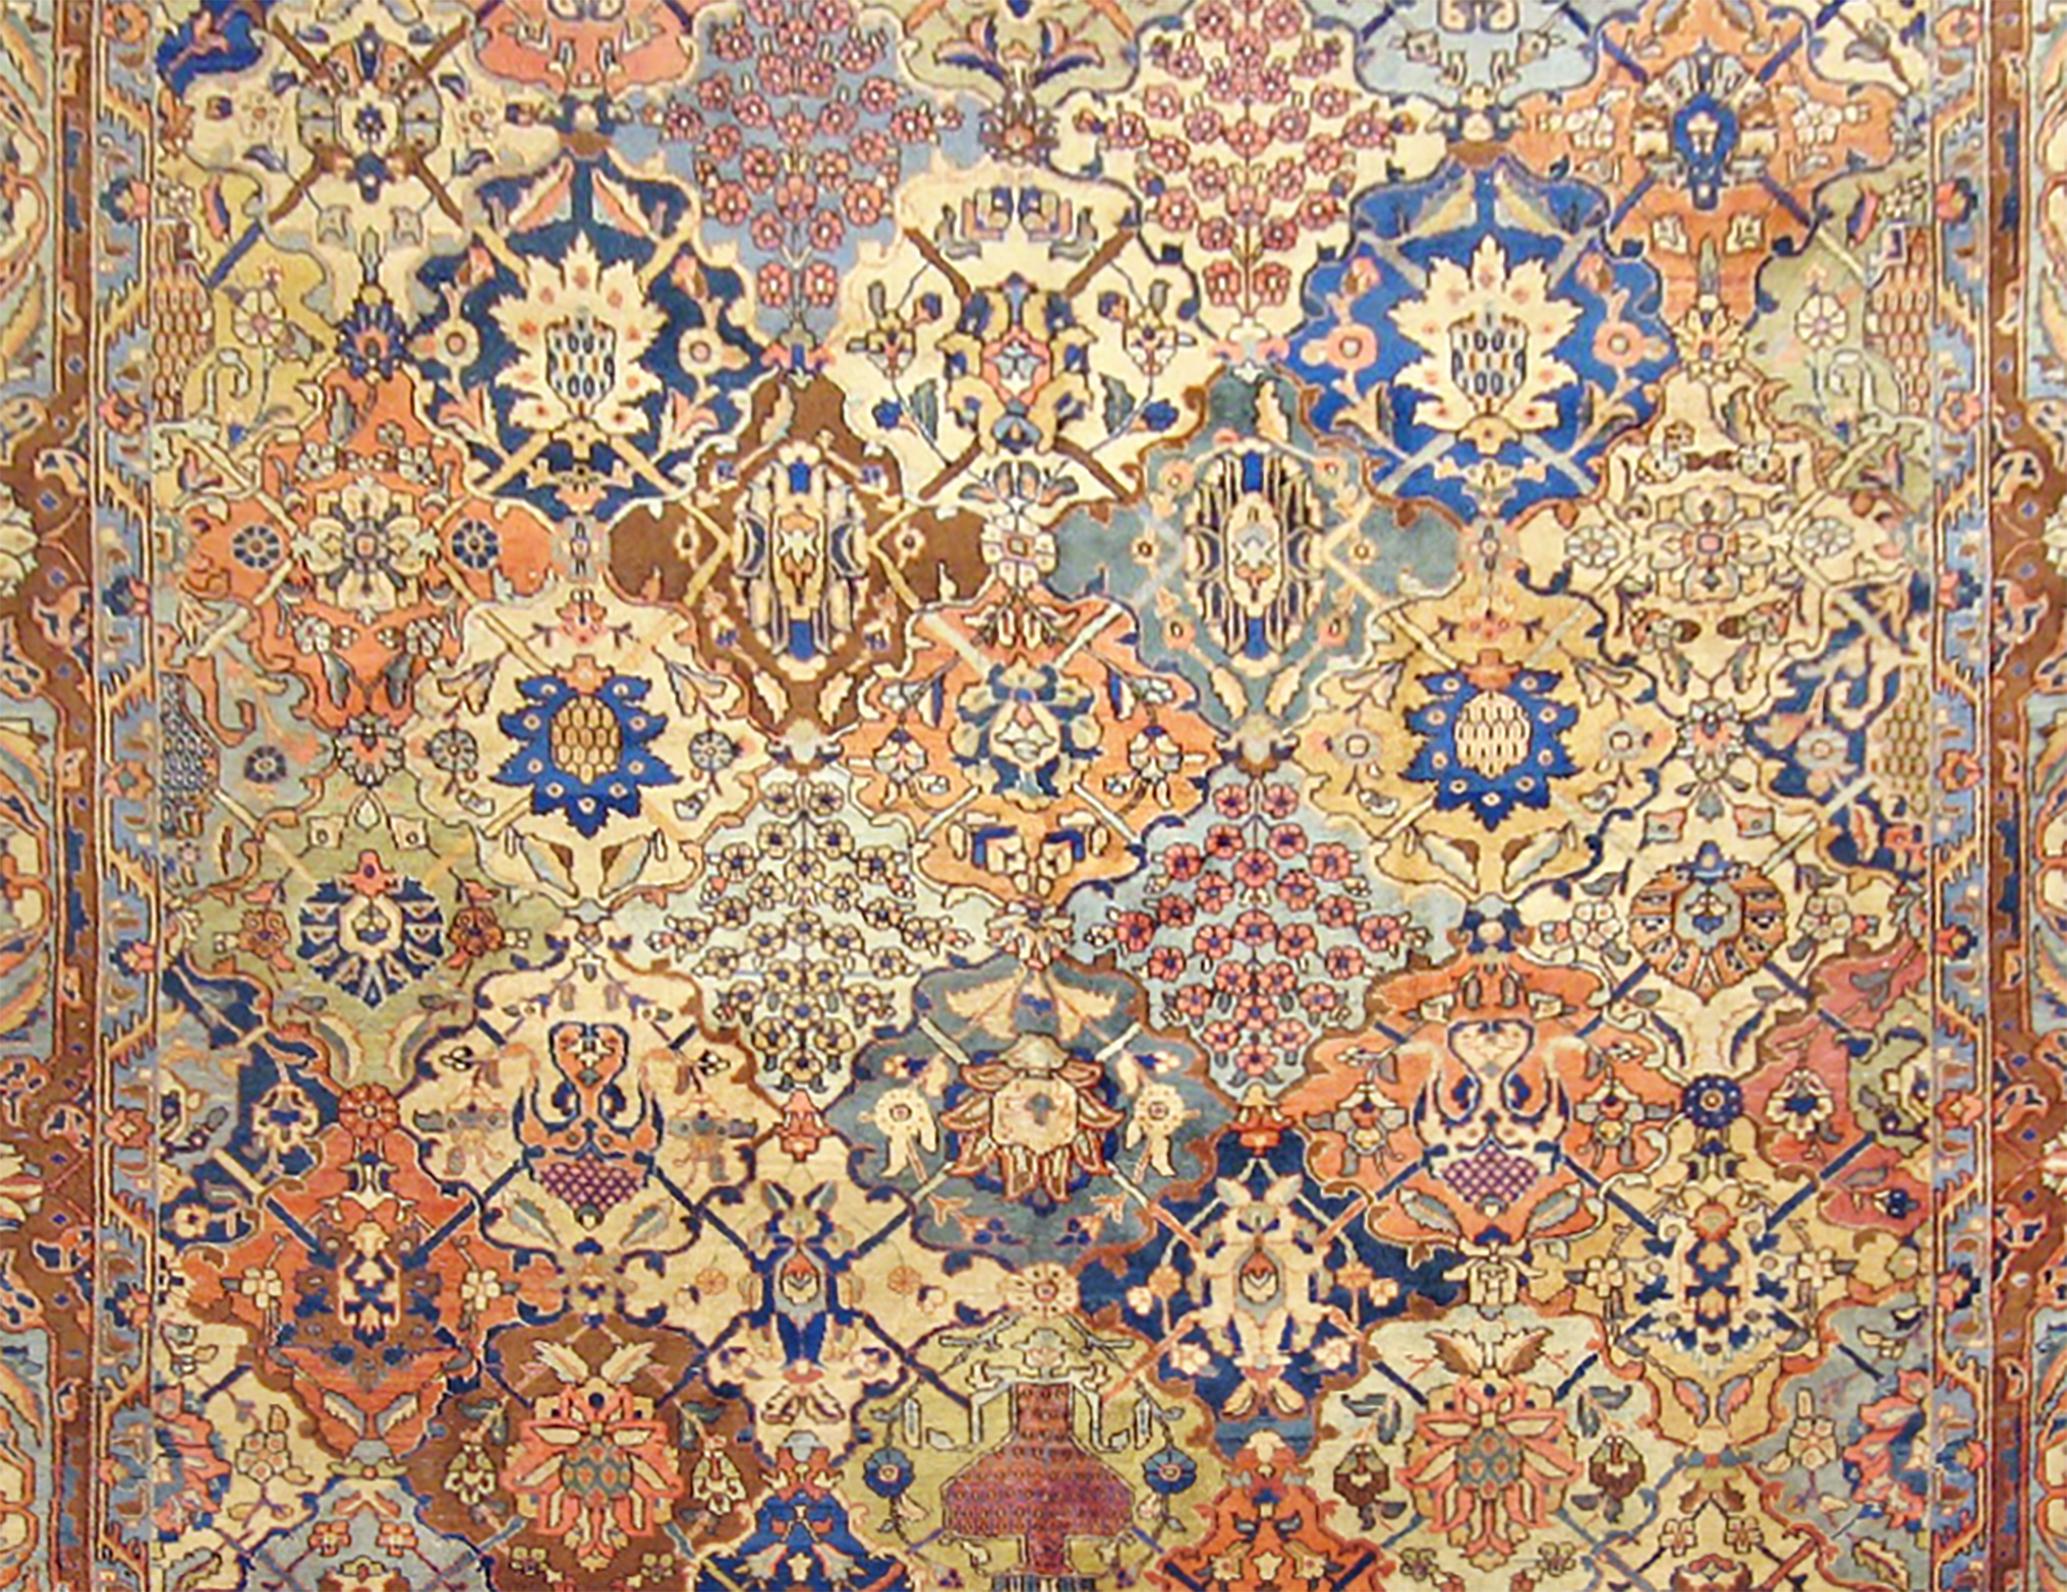 Hand-Knotted Antique Persian Tabriz Oriental Carpet in Room Size with Petagh Design For Sale